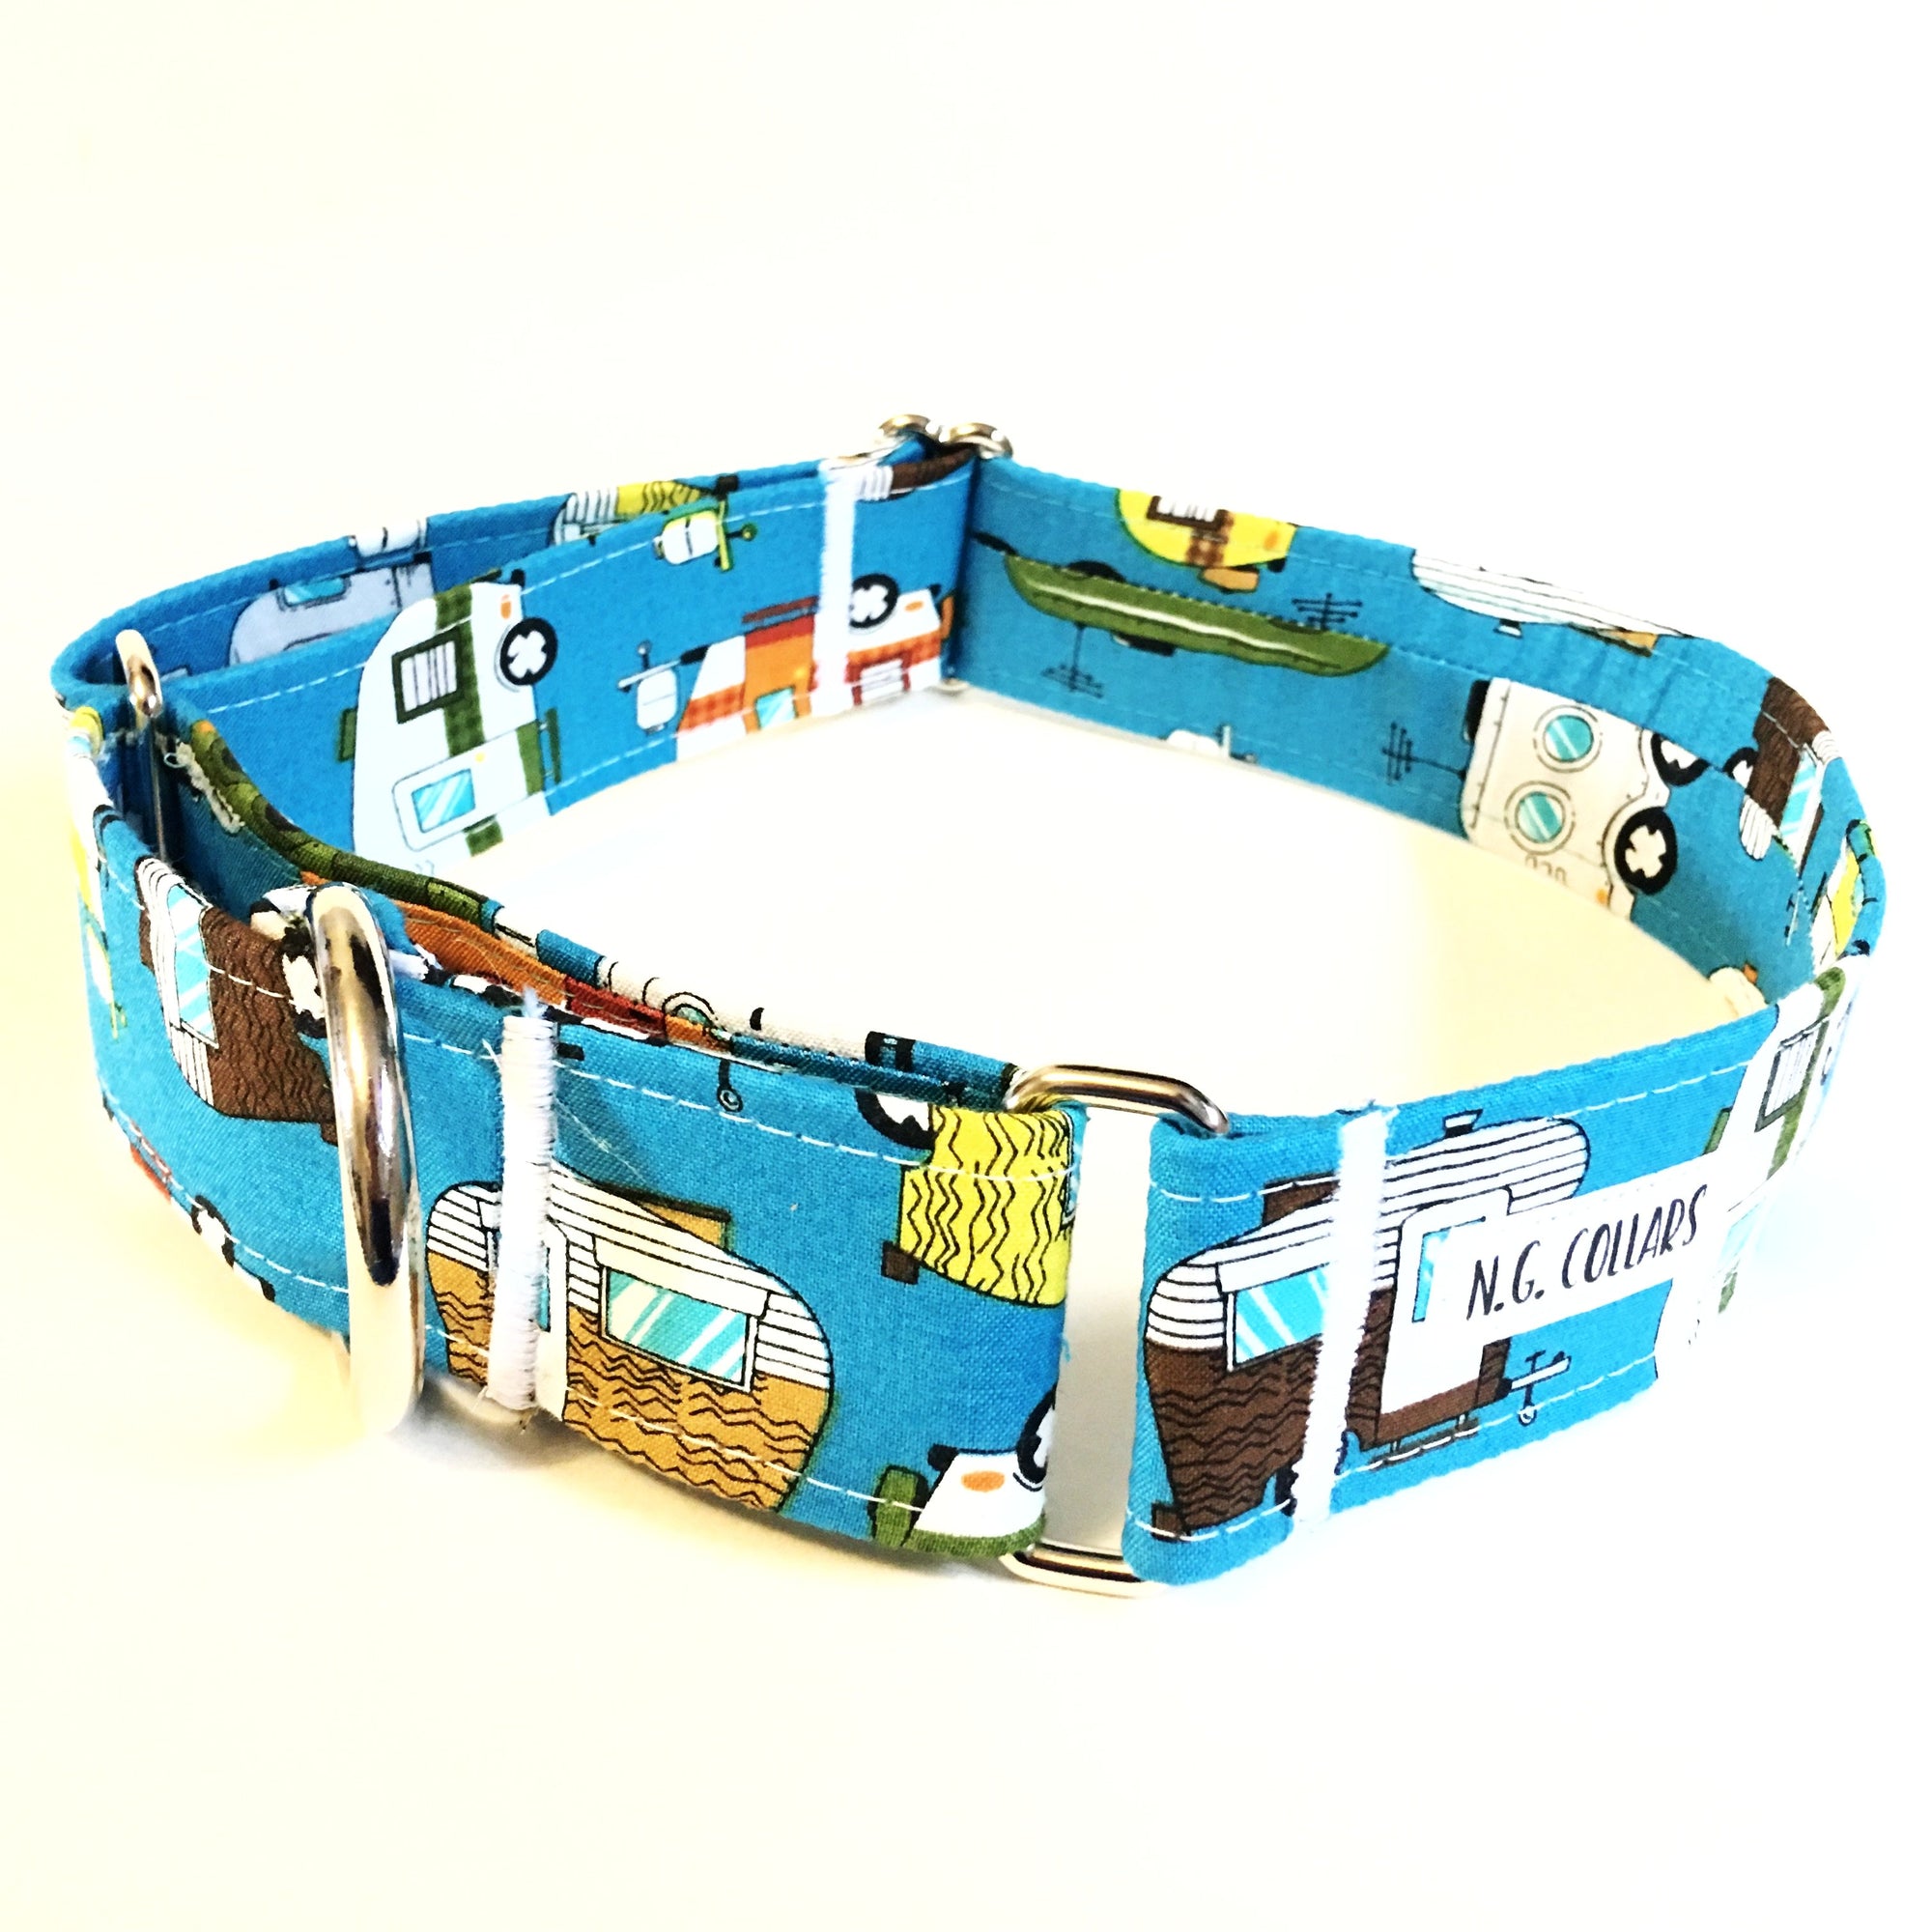 Home Away From Home Martingale Collar - N.G. Collars